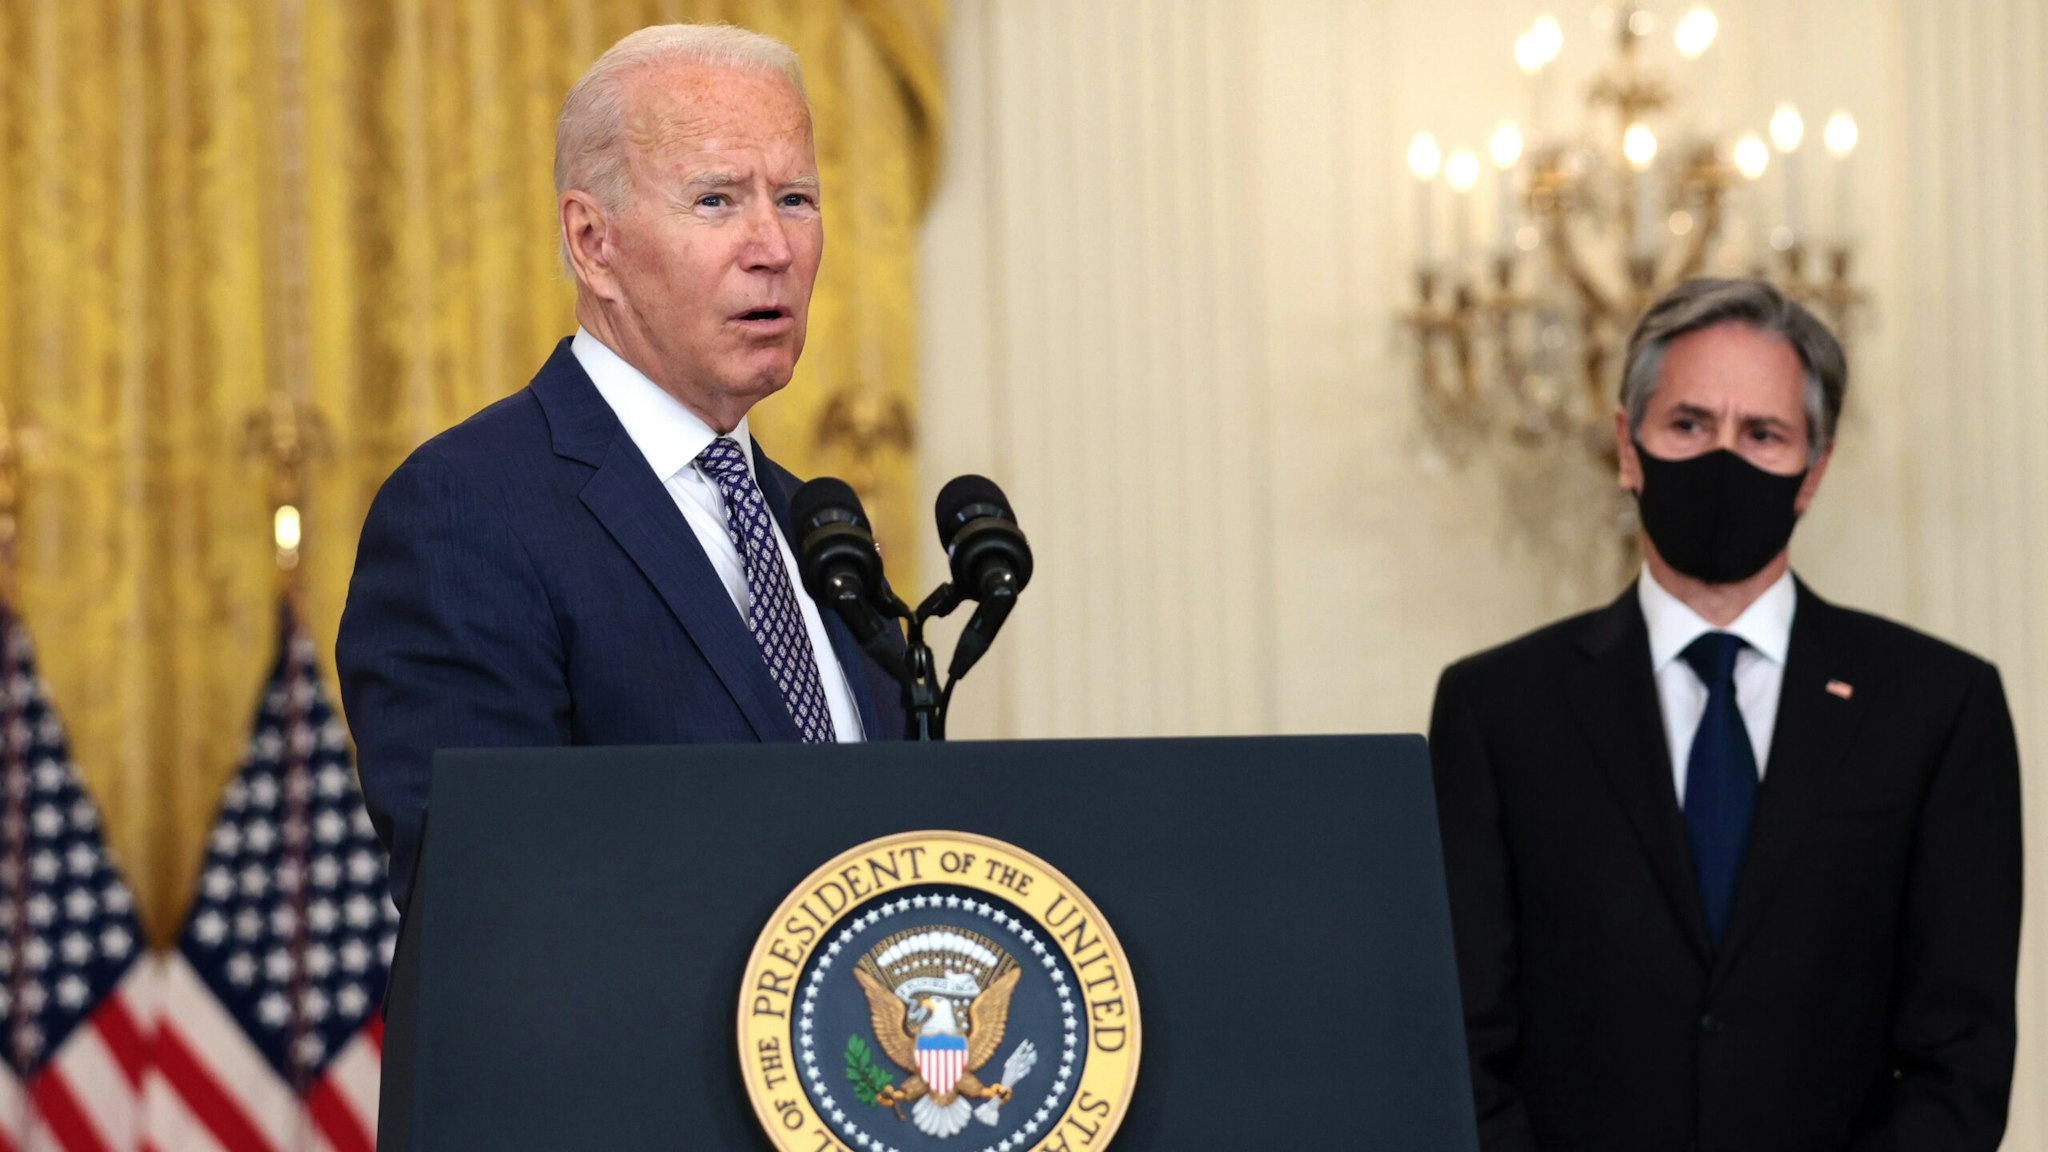 WASHINGTON, DC - AUGUST 20: U.S. President Joe Biden gestures to Secretary of State Antony Blinken as he gives remarks on the U.S. military’s ongoing evacuation efforts in Afghanistan from the East Room of the White House on August 20, 2021 in Washington, DC. The White House announced earlier that the U.S. has evacuated almost 14,000 people from Afghanistan since the end of July.